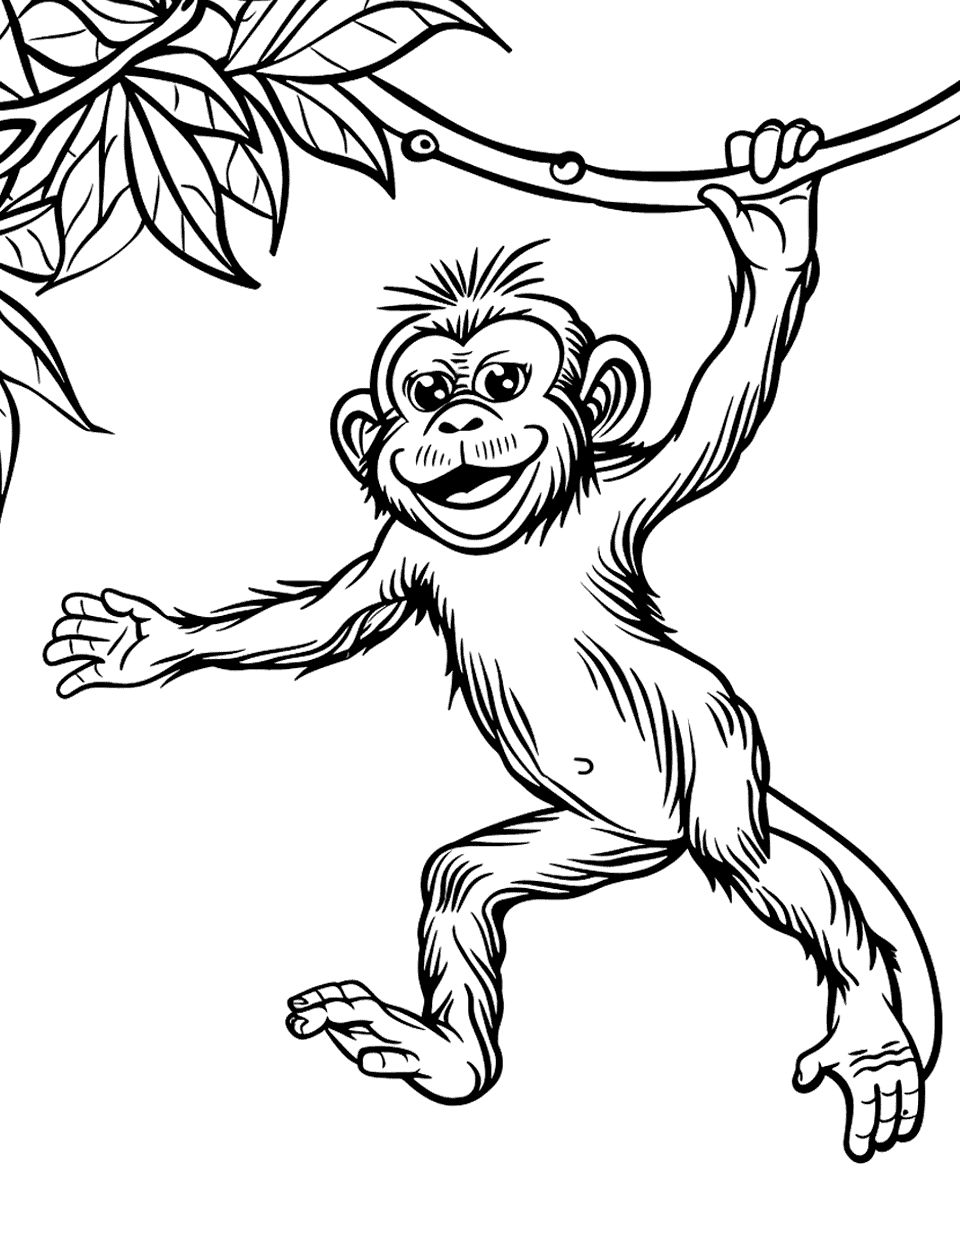 Monkey Jumping Joyfully Coloring Page - A monkey mid-air, jumping joyfully from a low hanging tree branch.